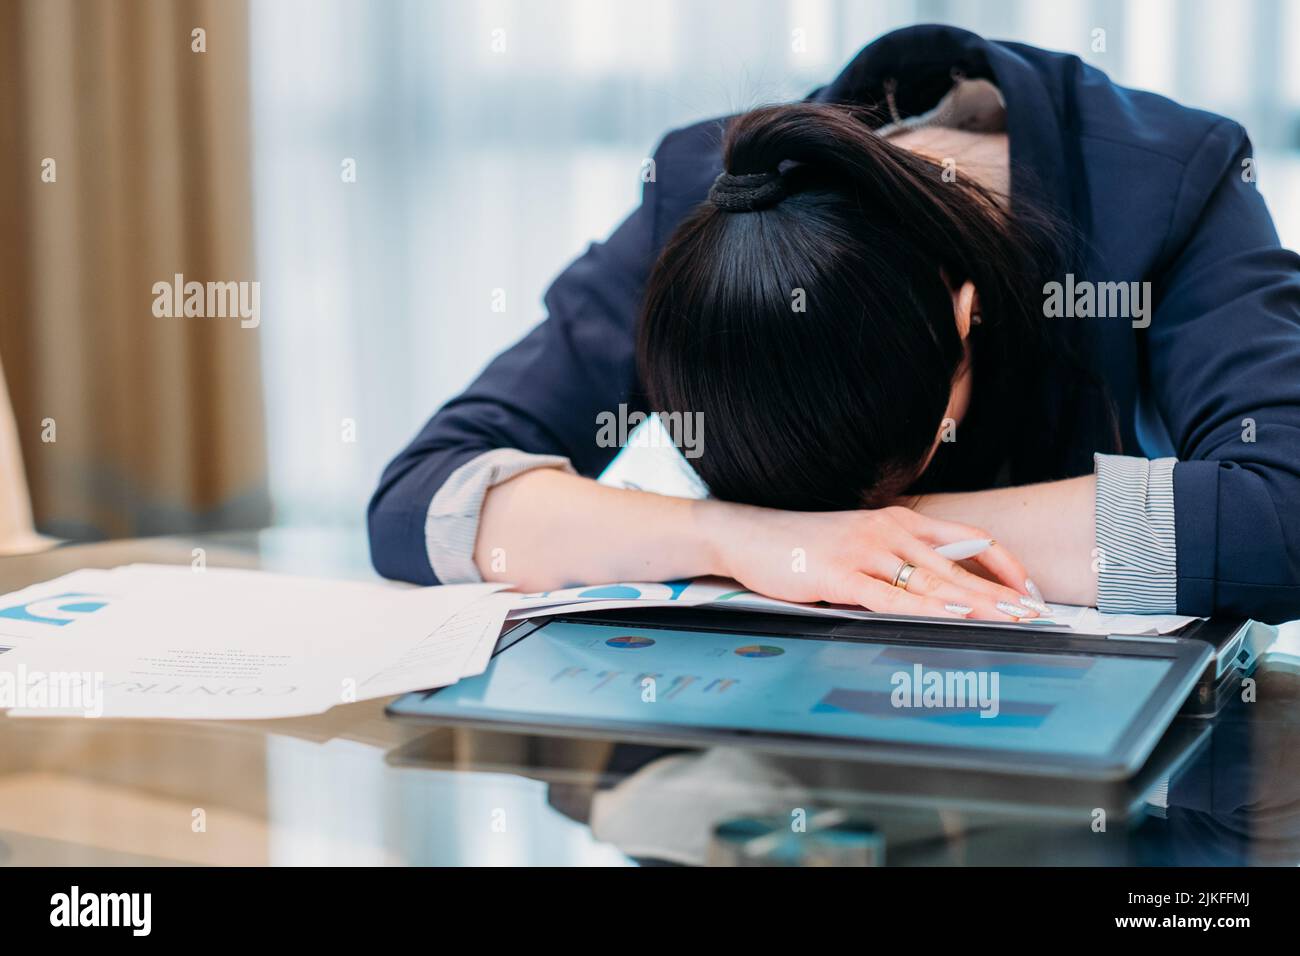 working long hours business overworked tired woman Stock Photo